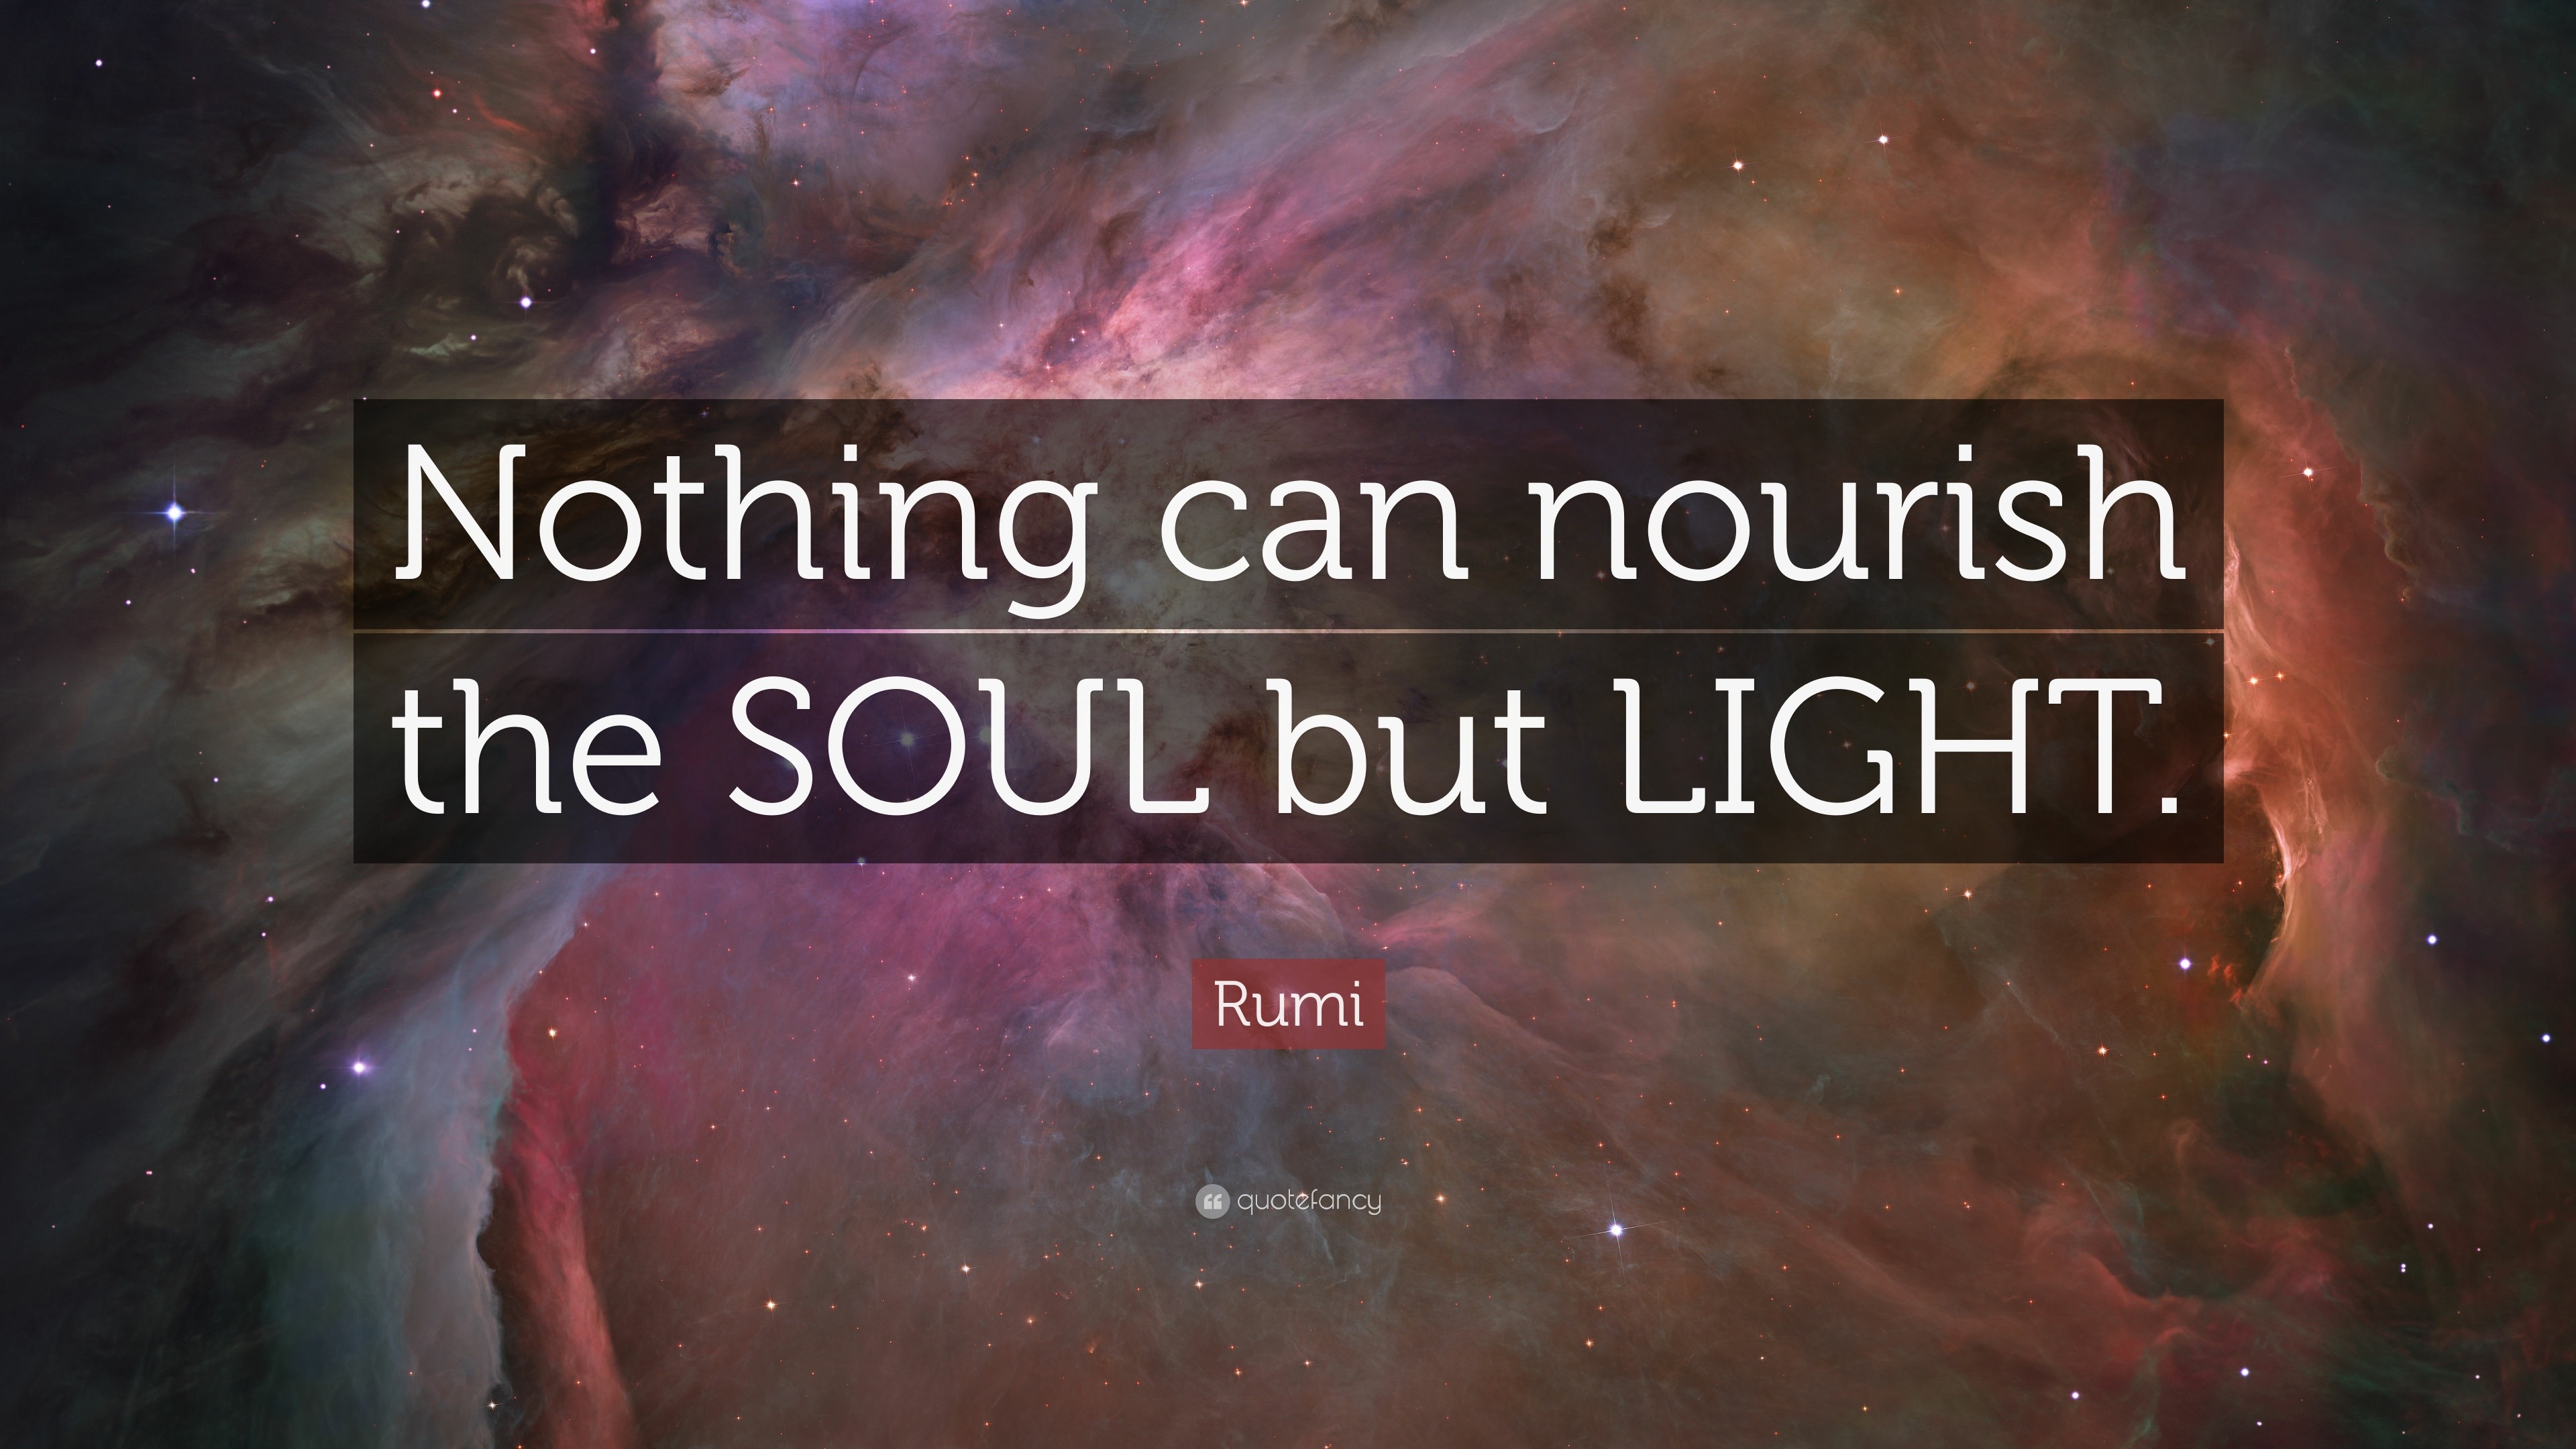 Rumi Quote “Nothing can nourish the SOUL but LIGHT ”